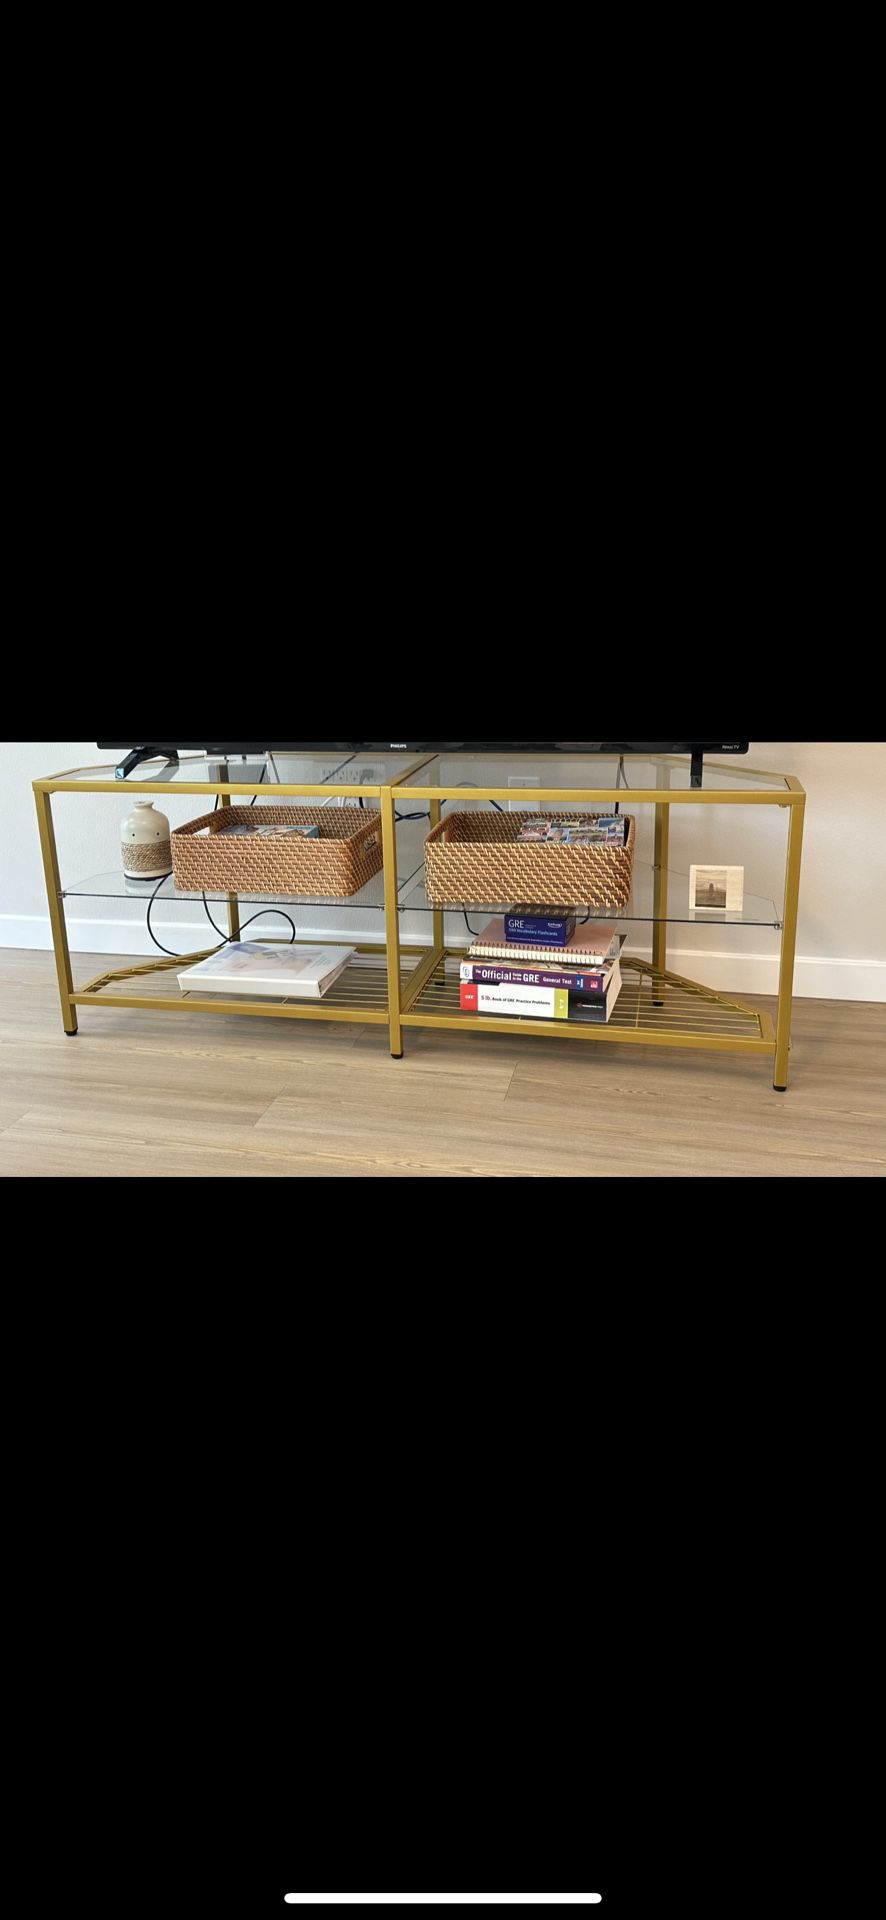 Gold TV Stand